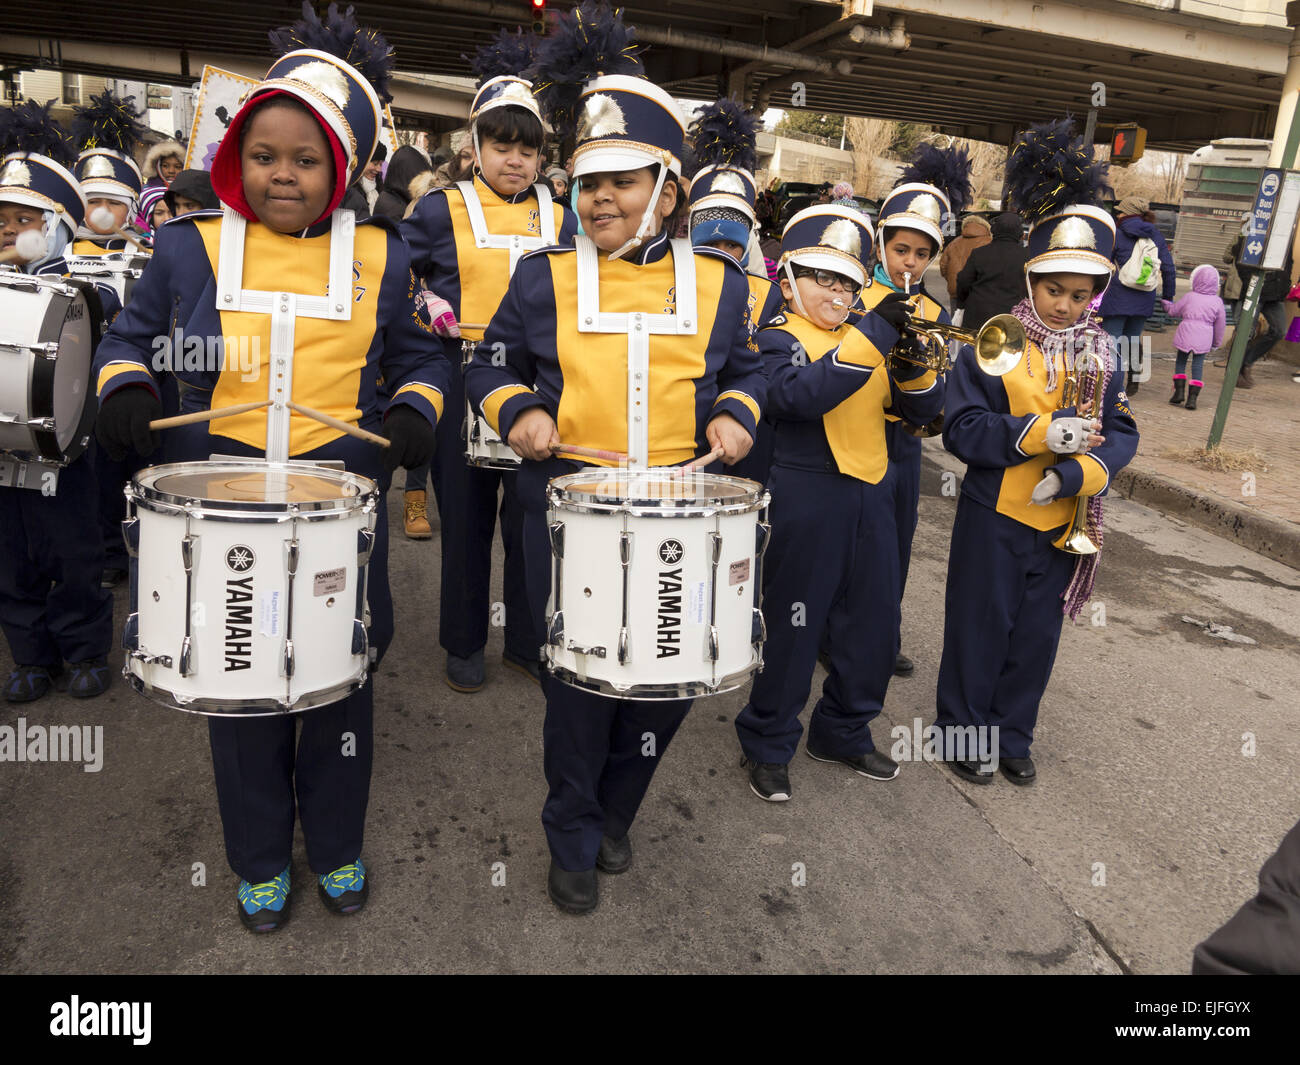 Elementary school marching band in the Three Kings Day Parade in Williamsburg, Brooklyn, NY. Stock Photo